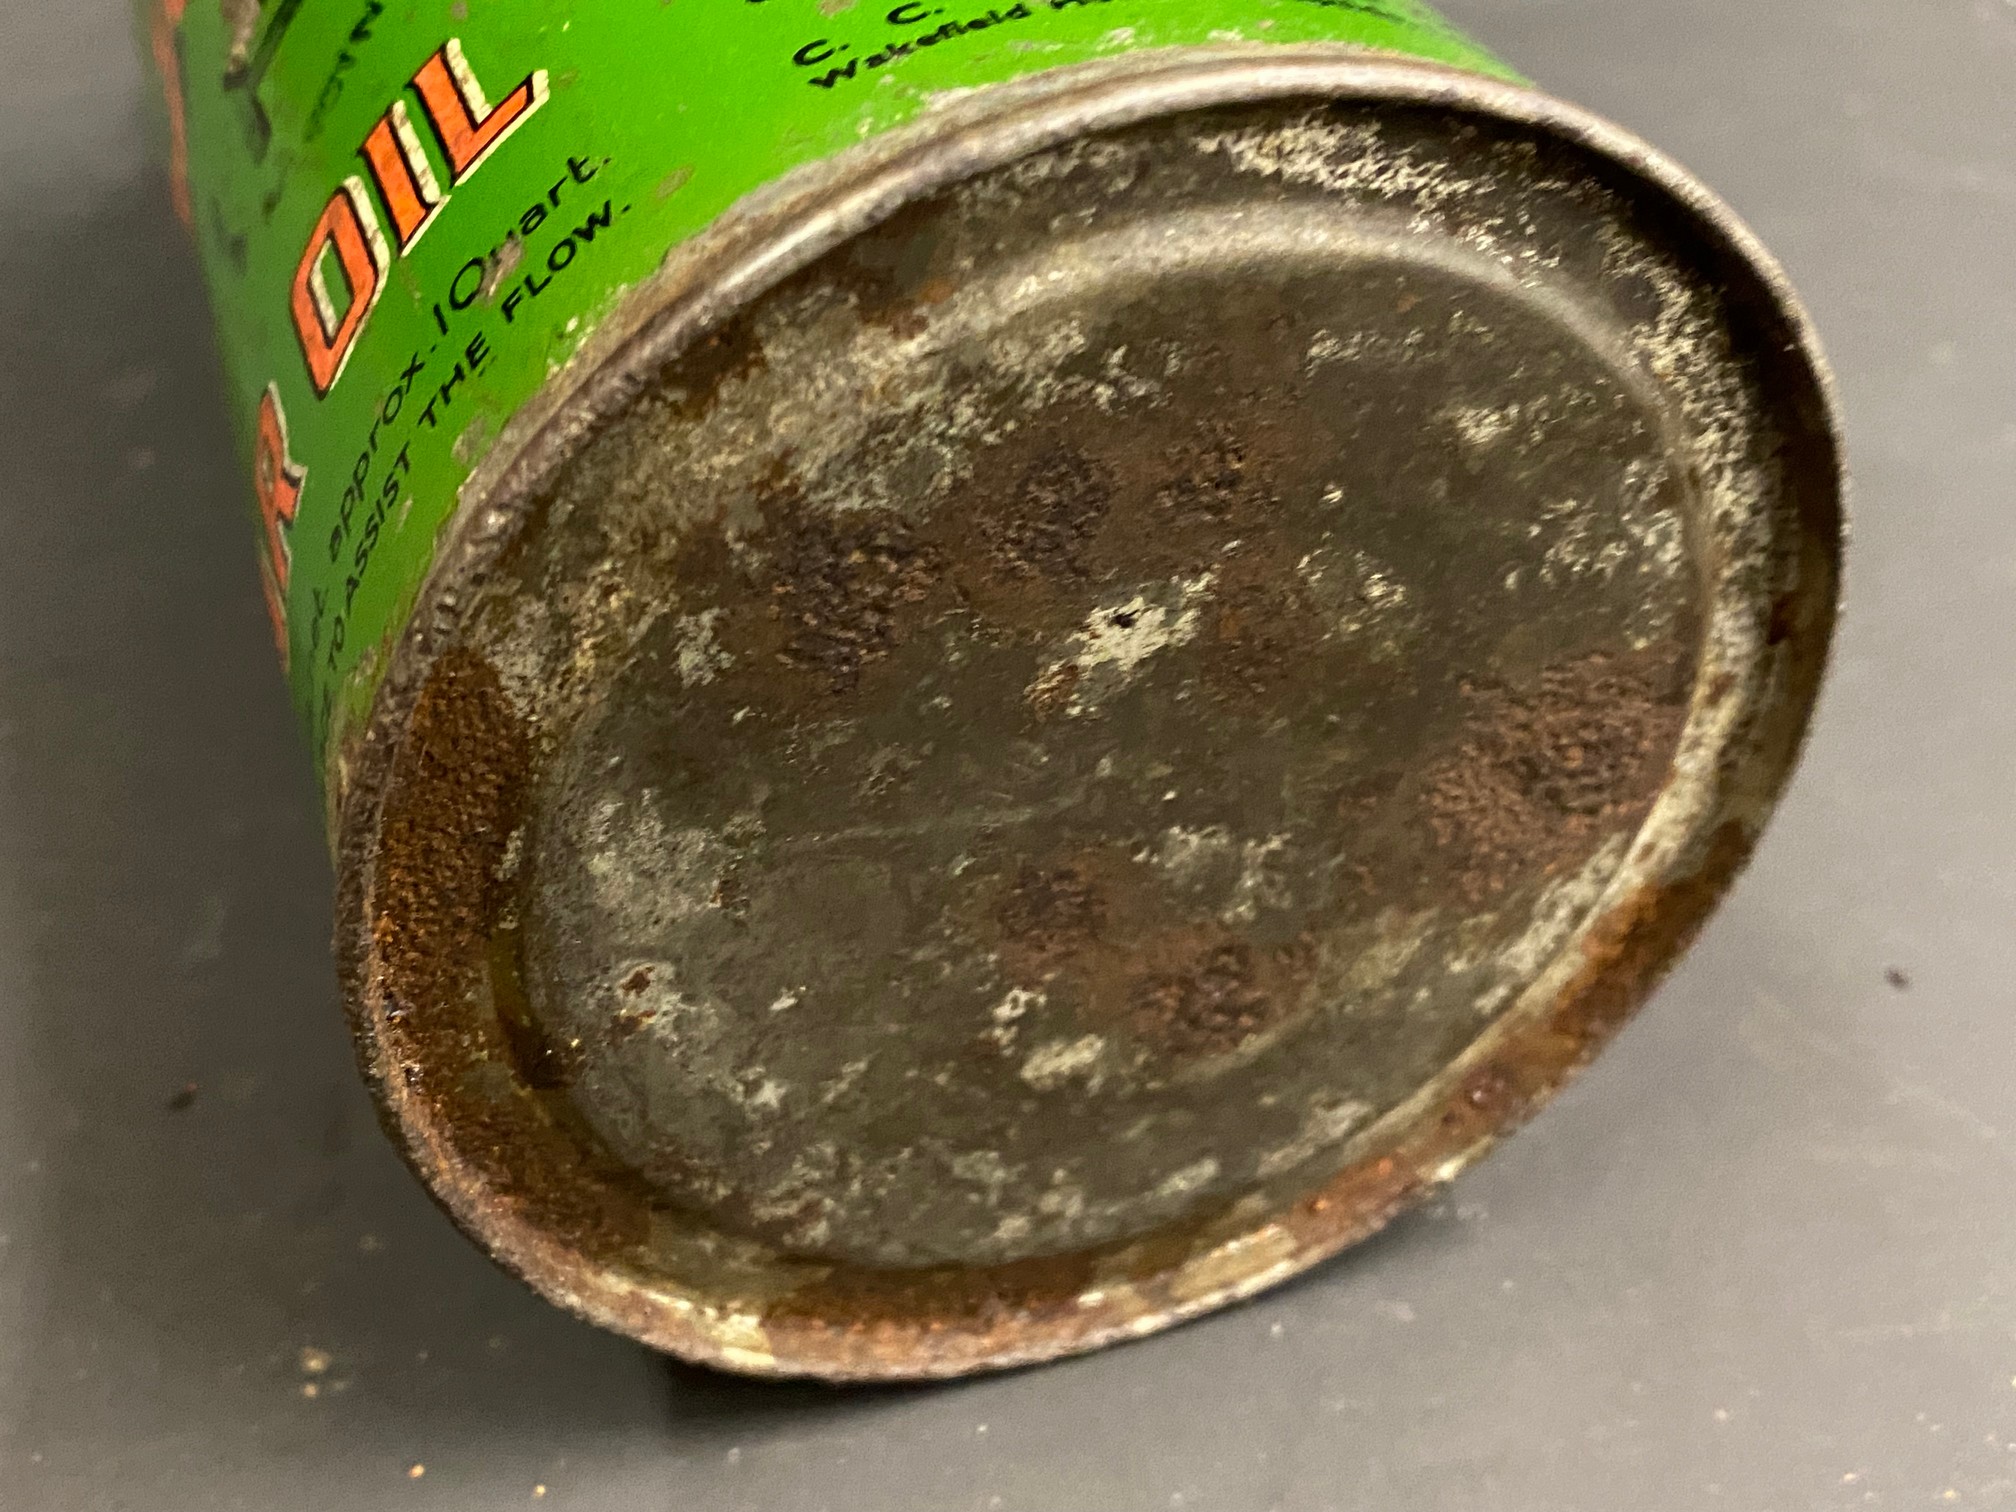 A Wakefield Castrol Gear Oil 'F' grade cylindrical quart can with image of a gearbox internals, - Image 6 of 7